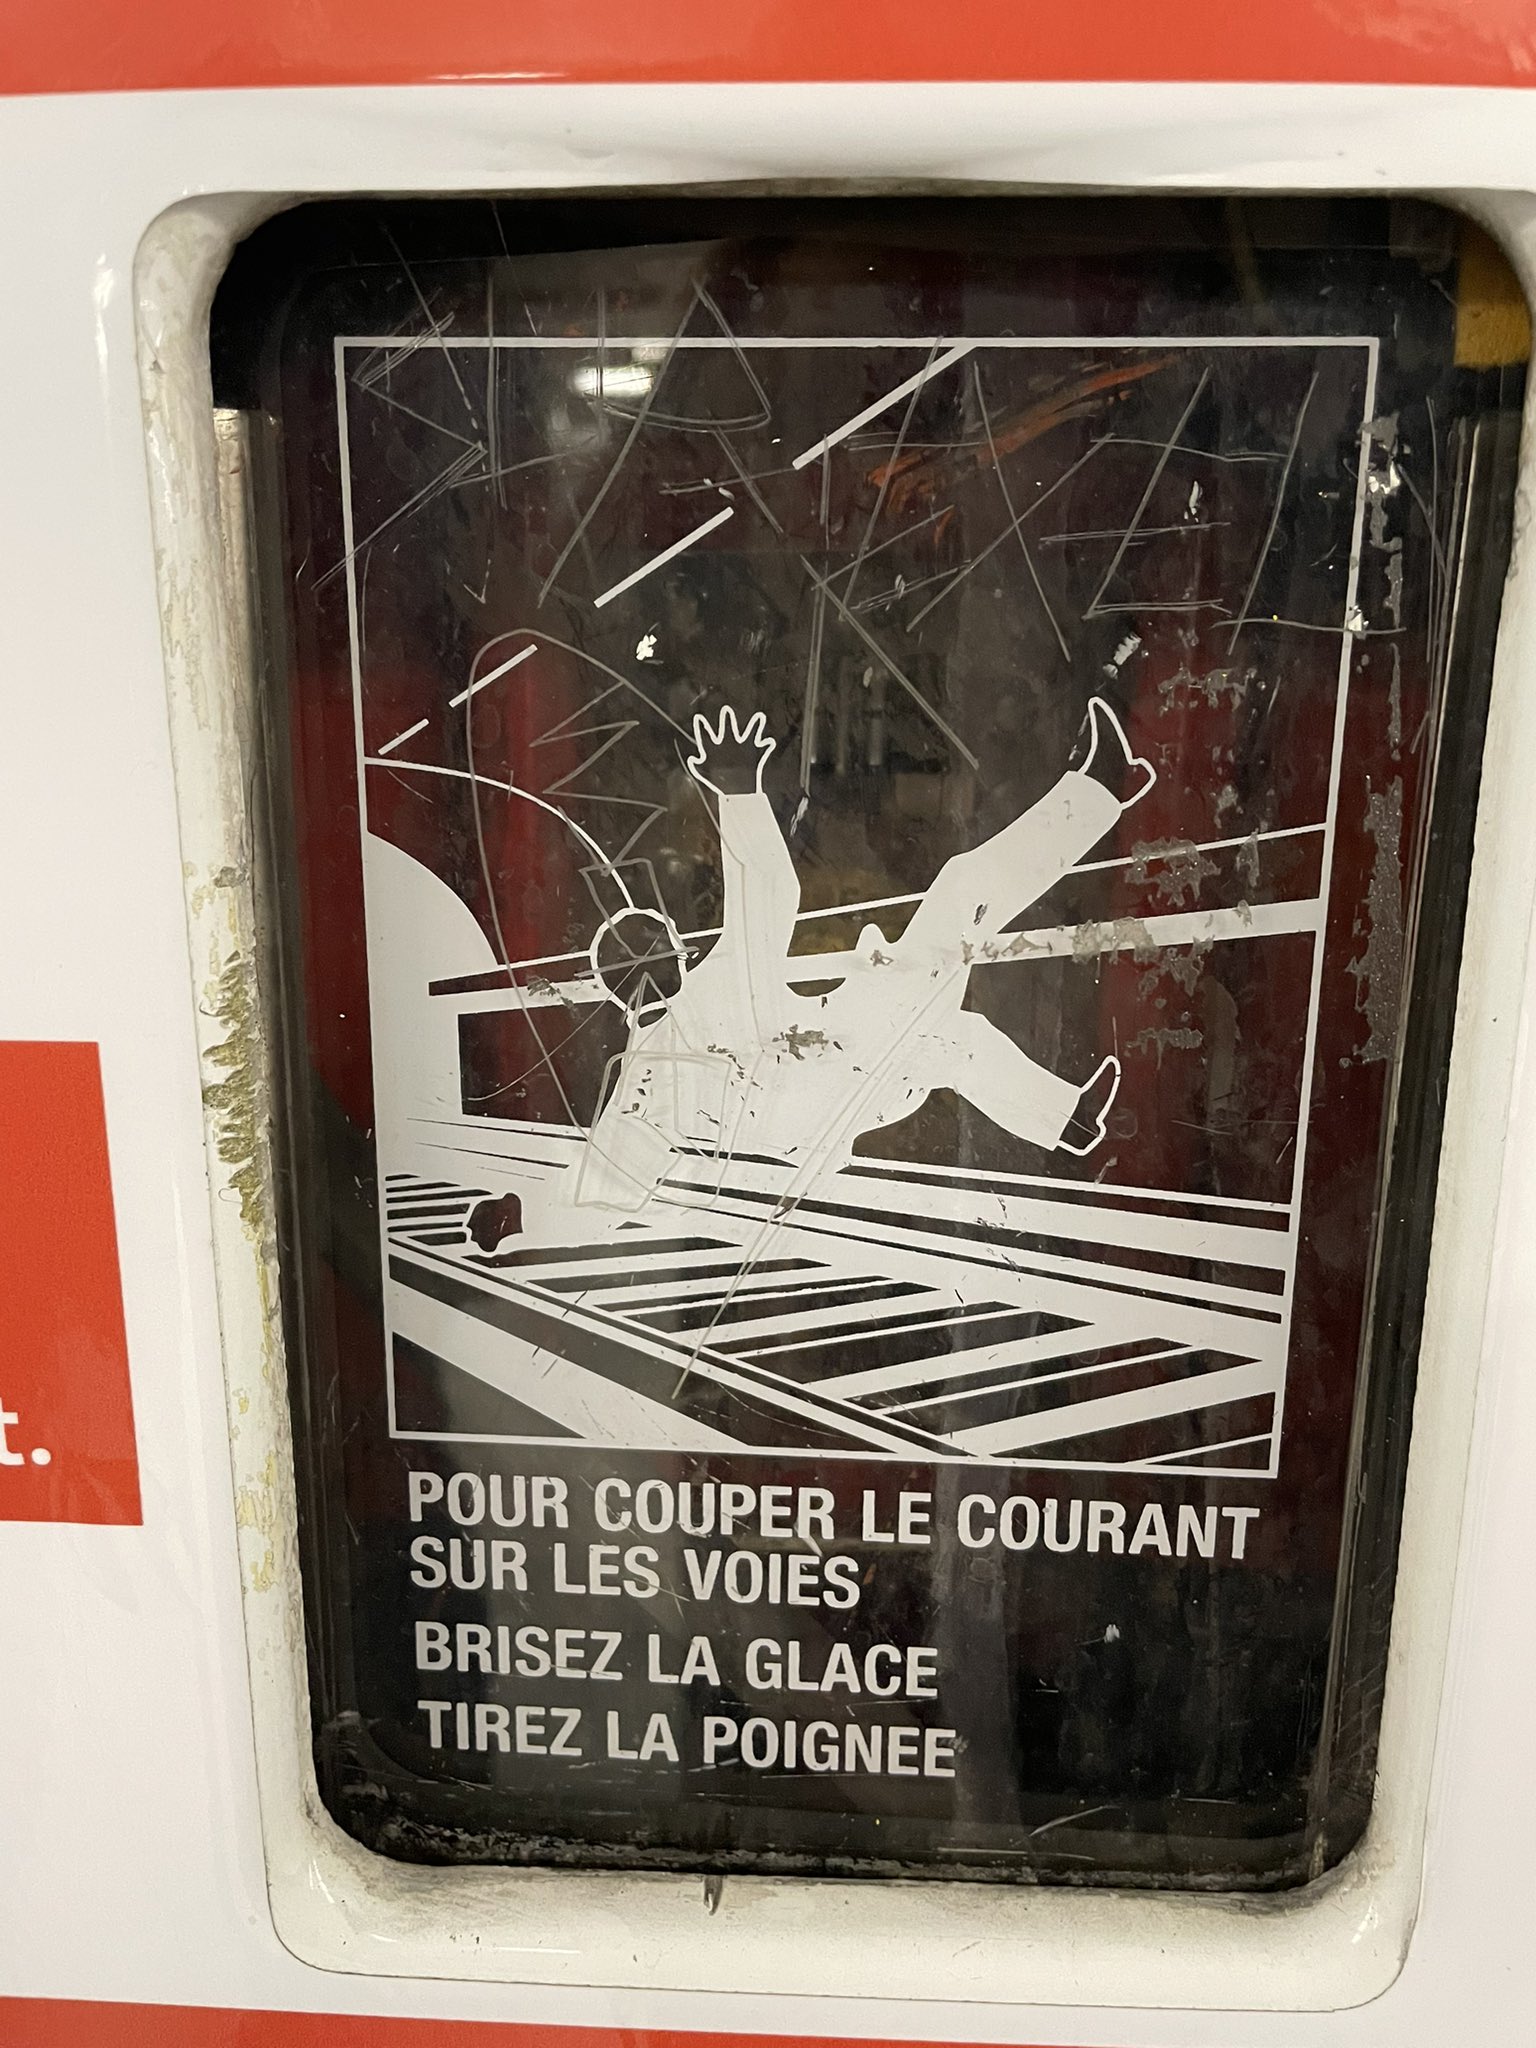 A warning to not breakdance on the subway rails